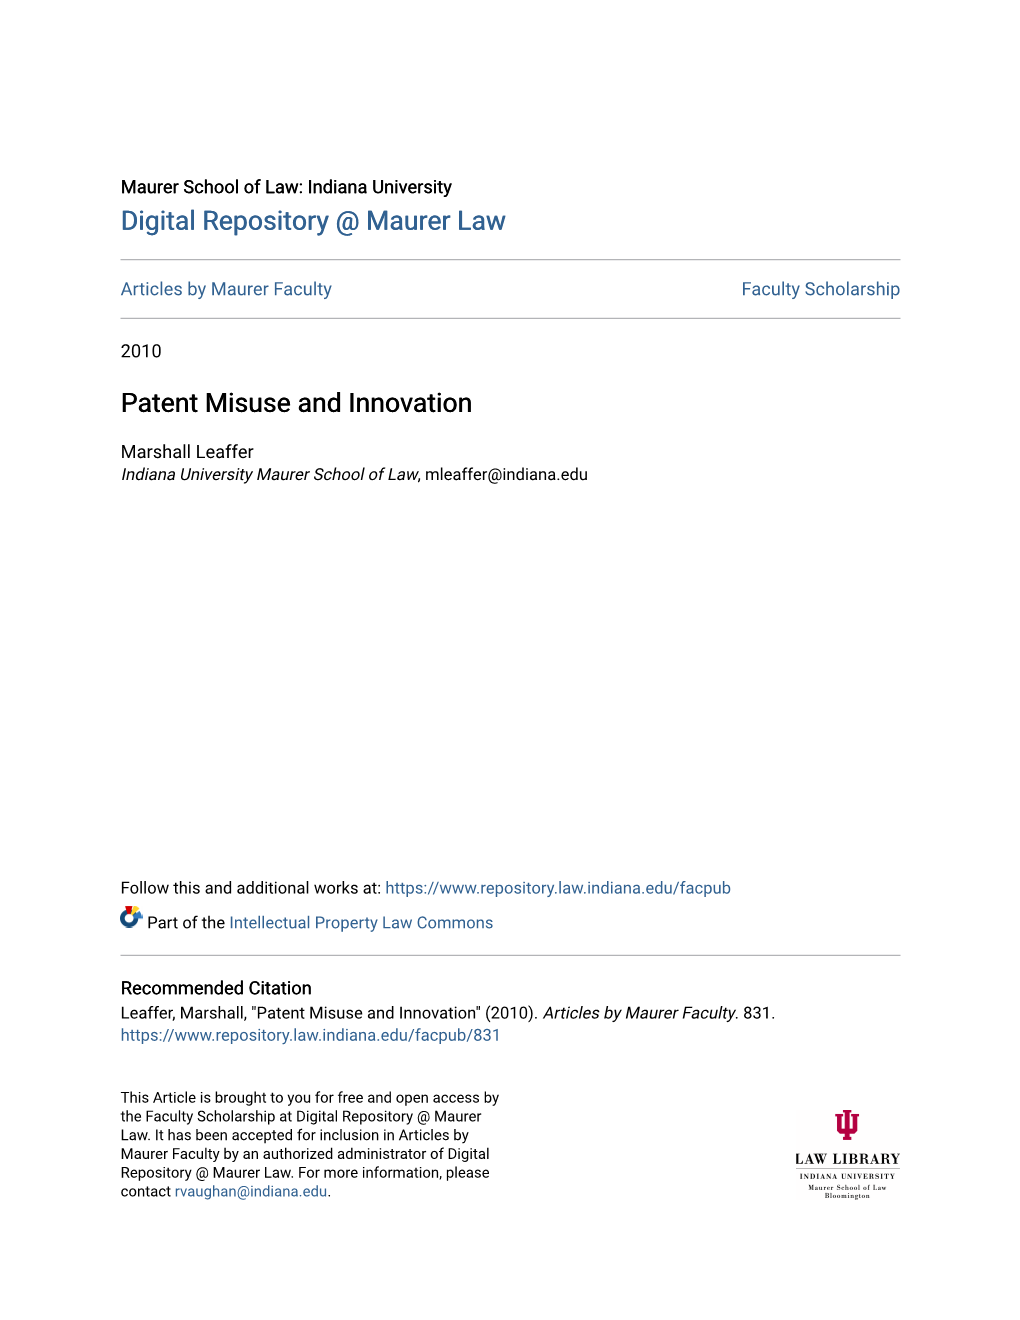 Patent Misuse and Innovation